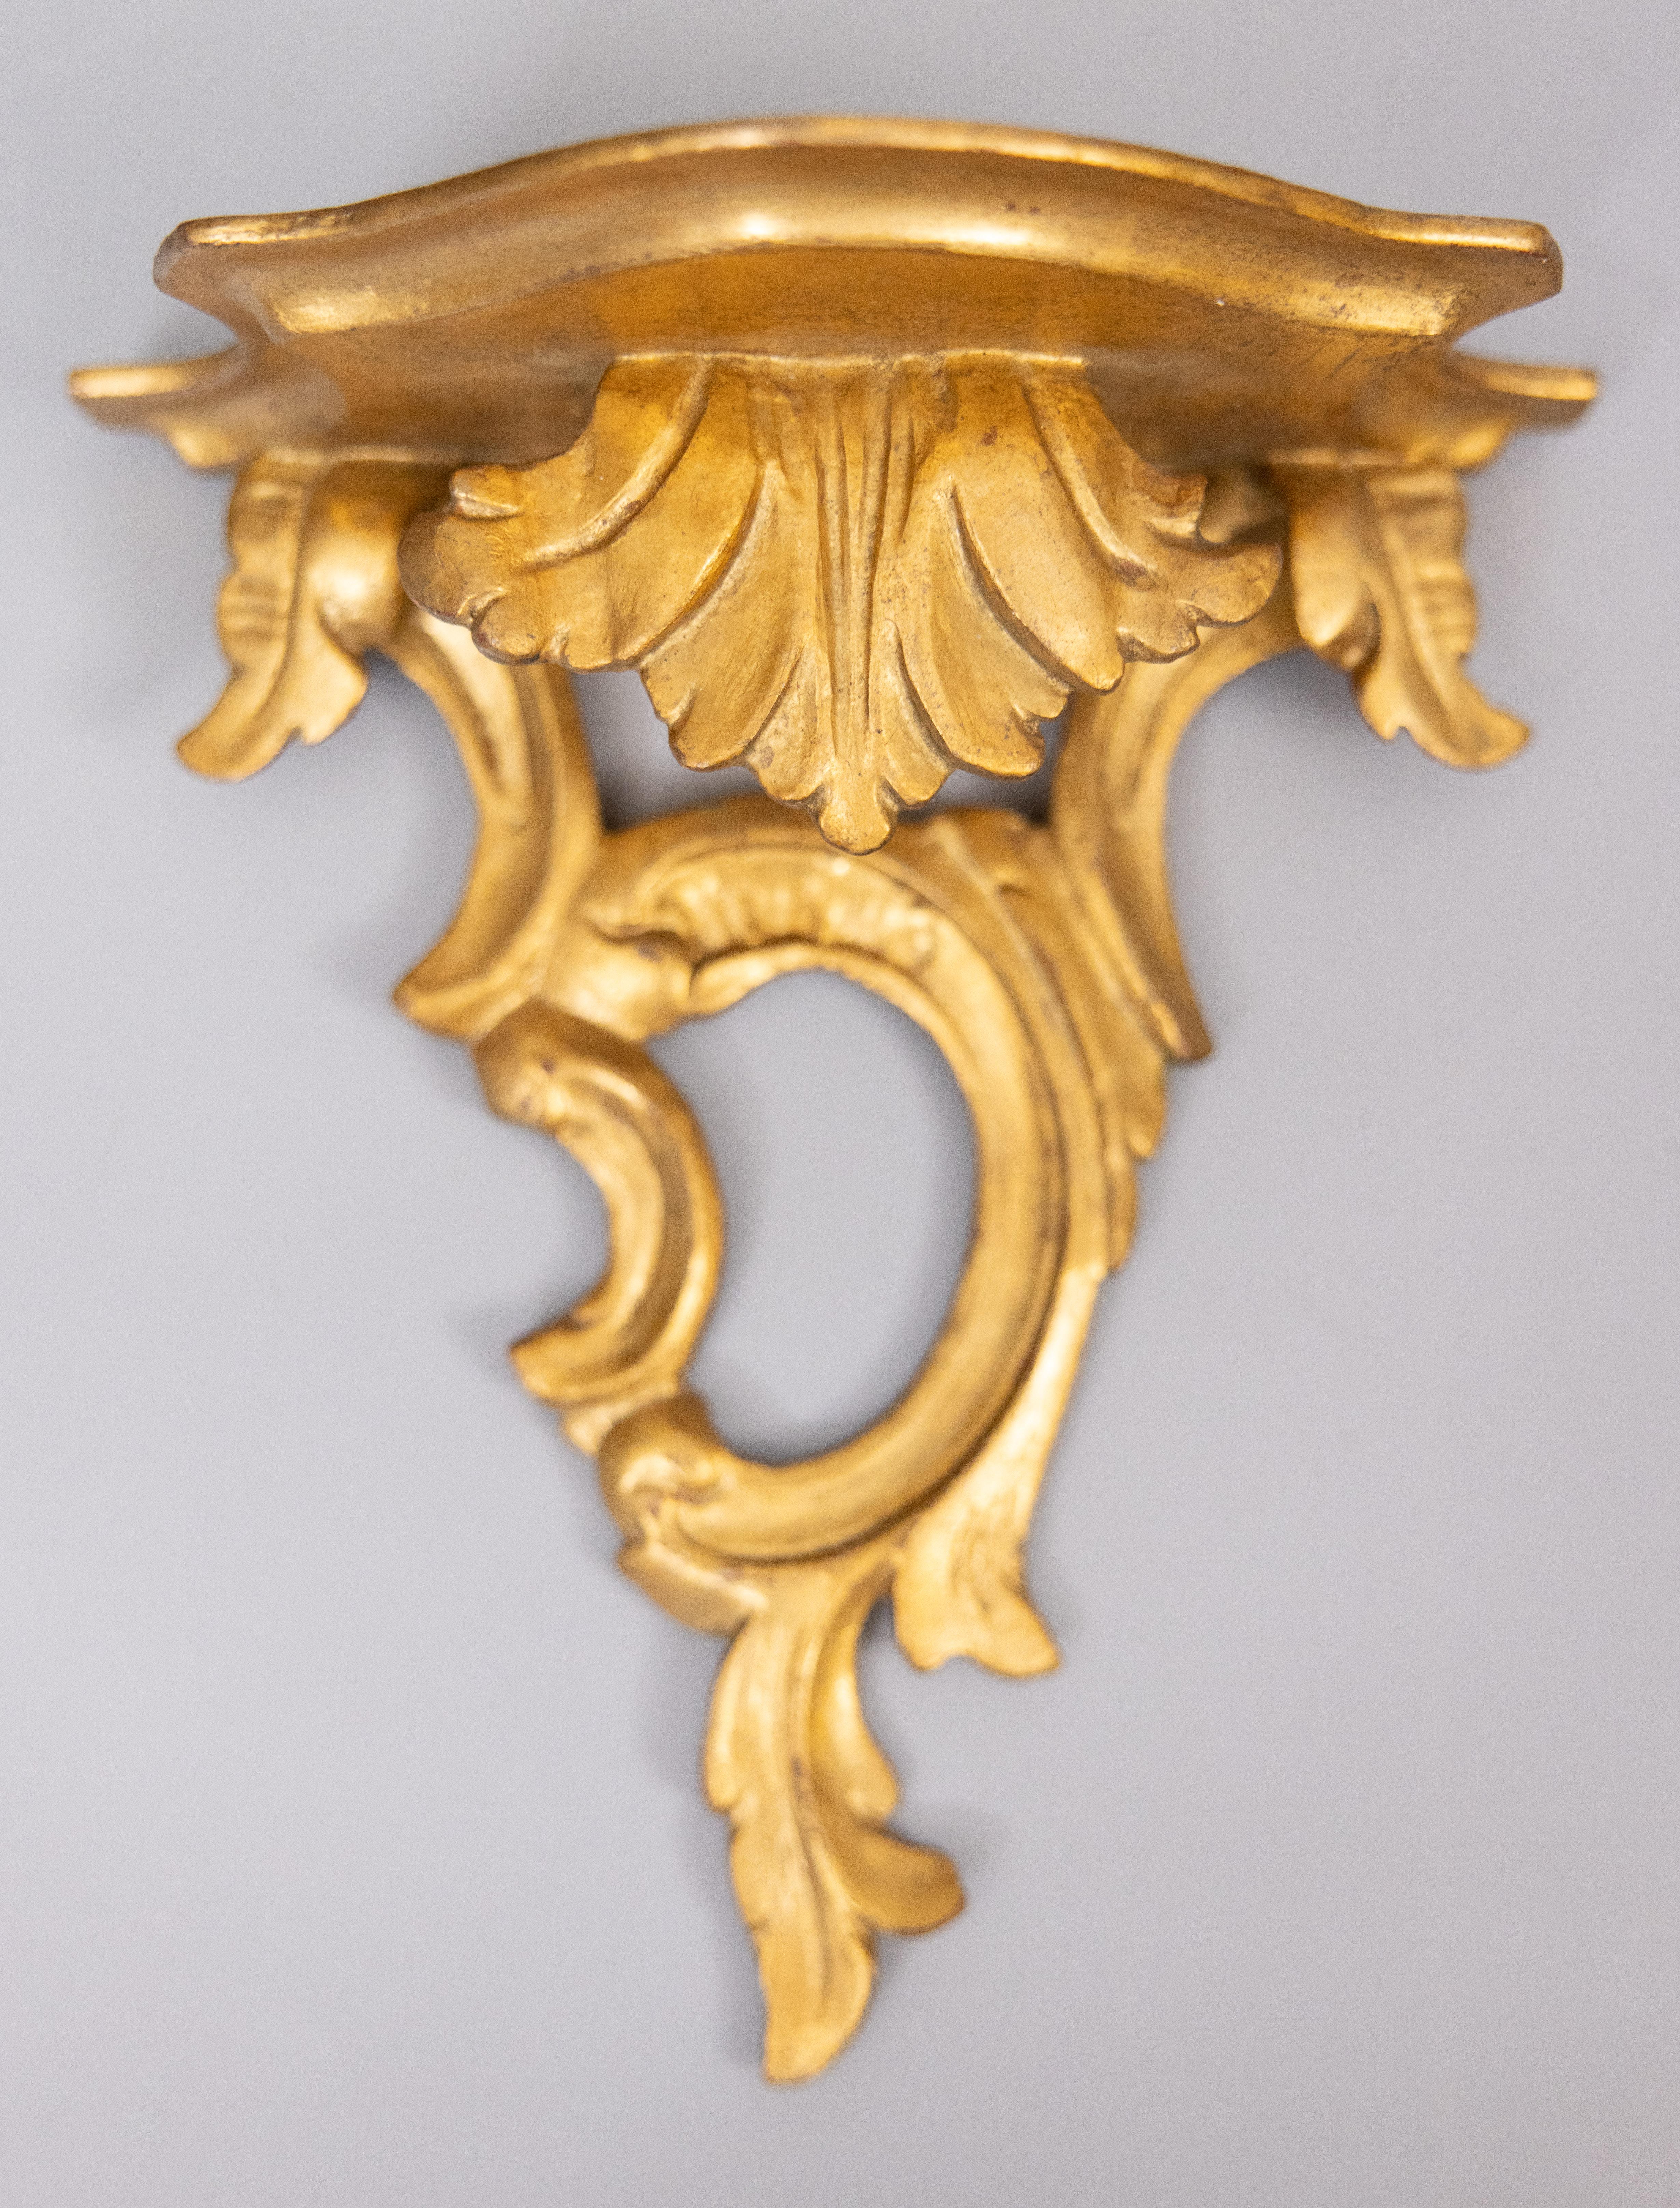 Neoclassical Revival Pair of Mid-20th Century Italian Carved Giltwood Wall Brackets Shelves